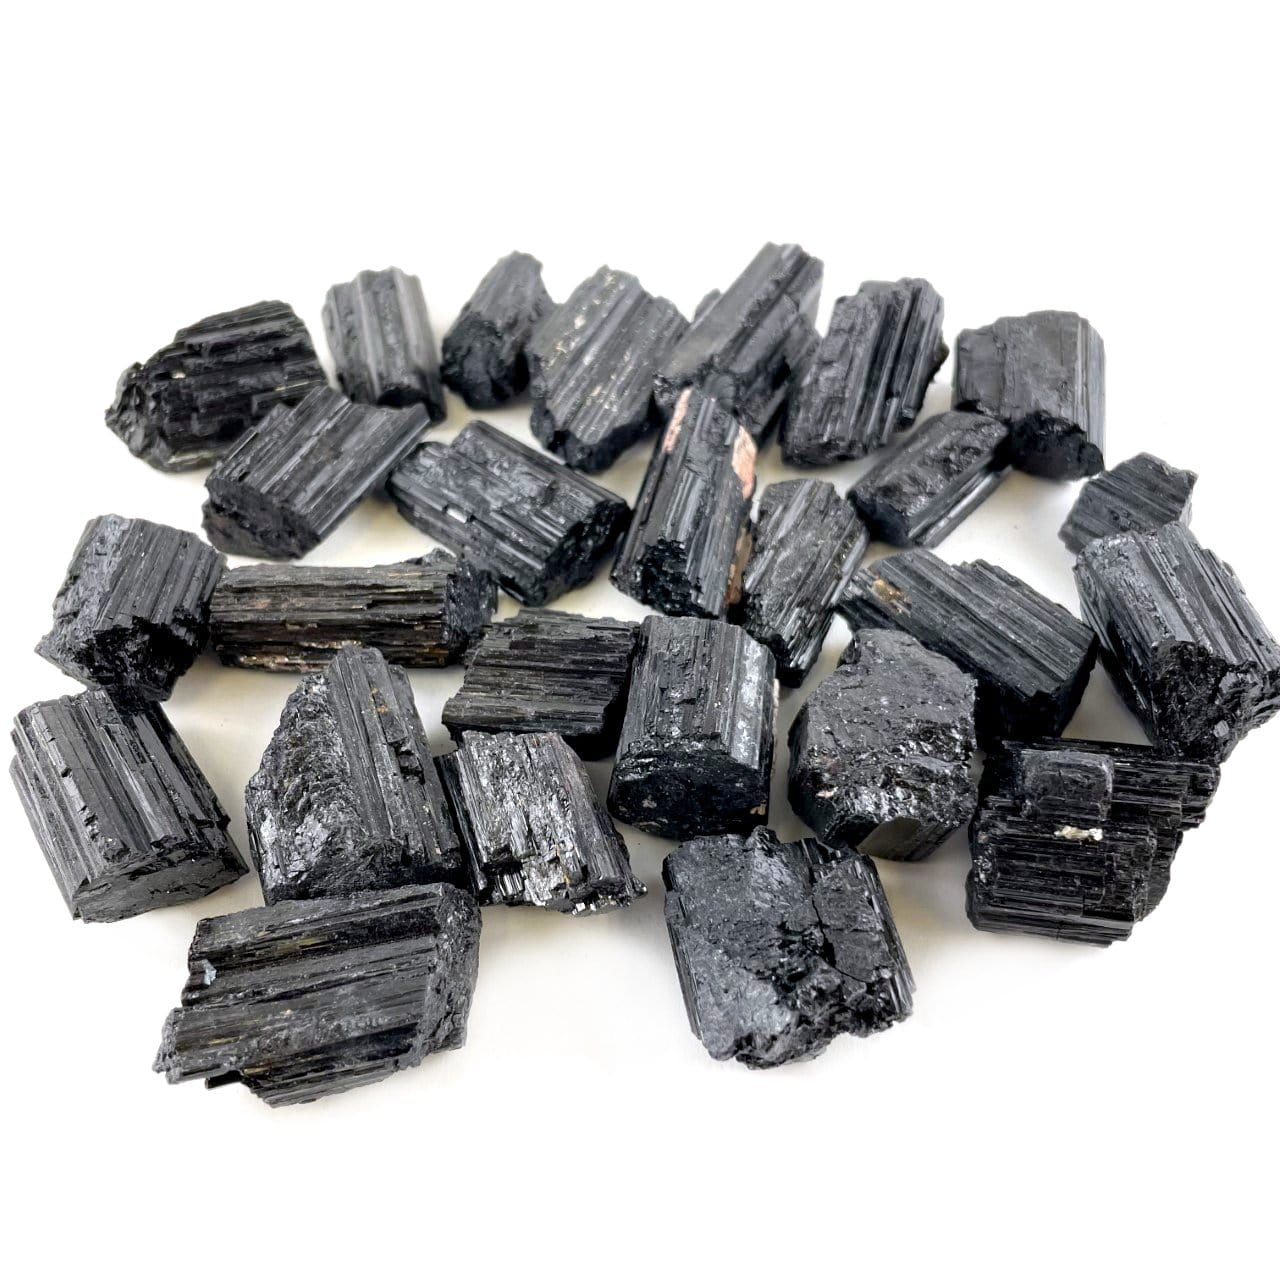 multiple black tourmaline pendant sized rods displaying different sizes and textures